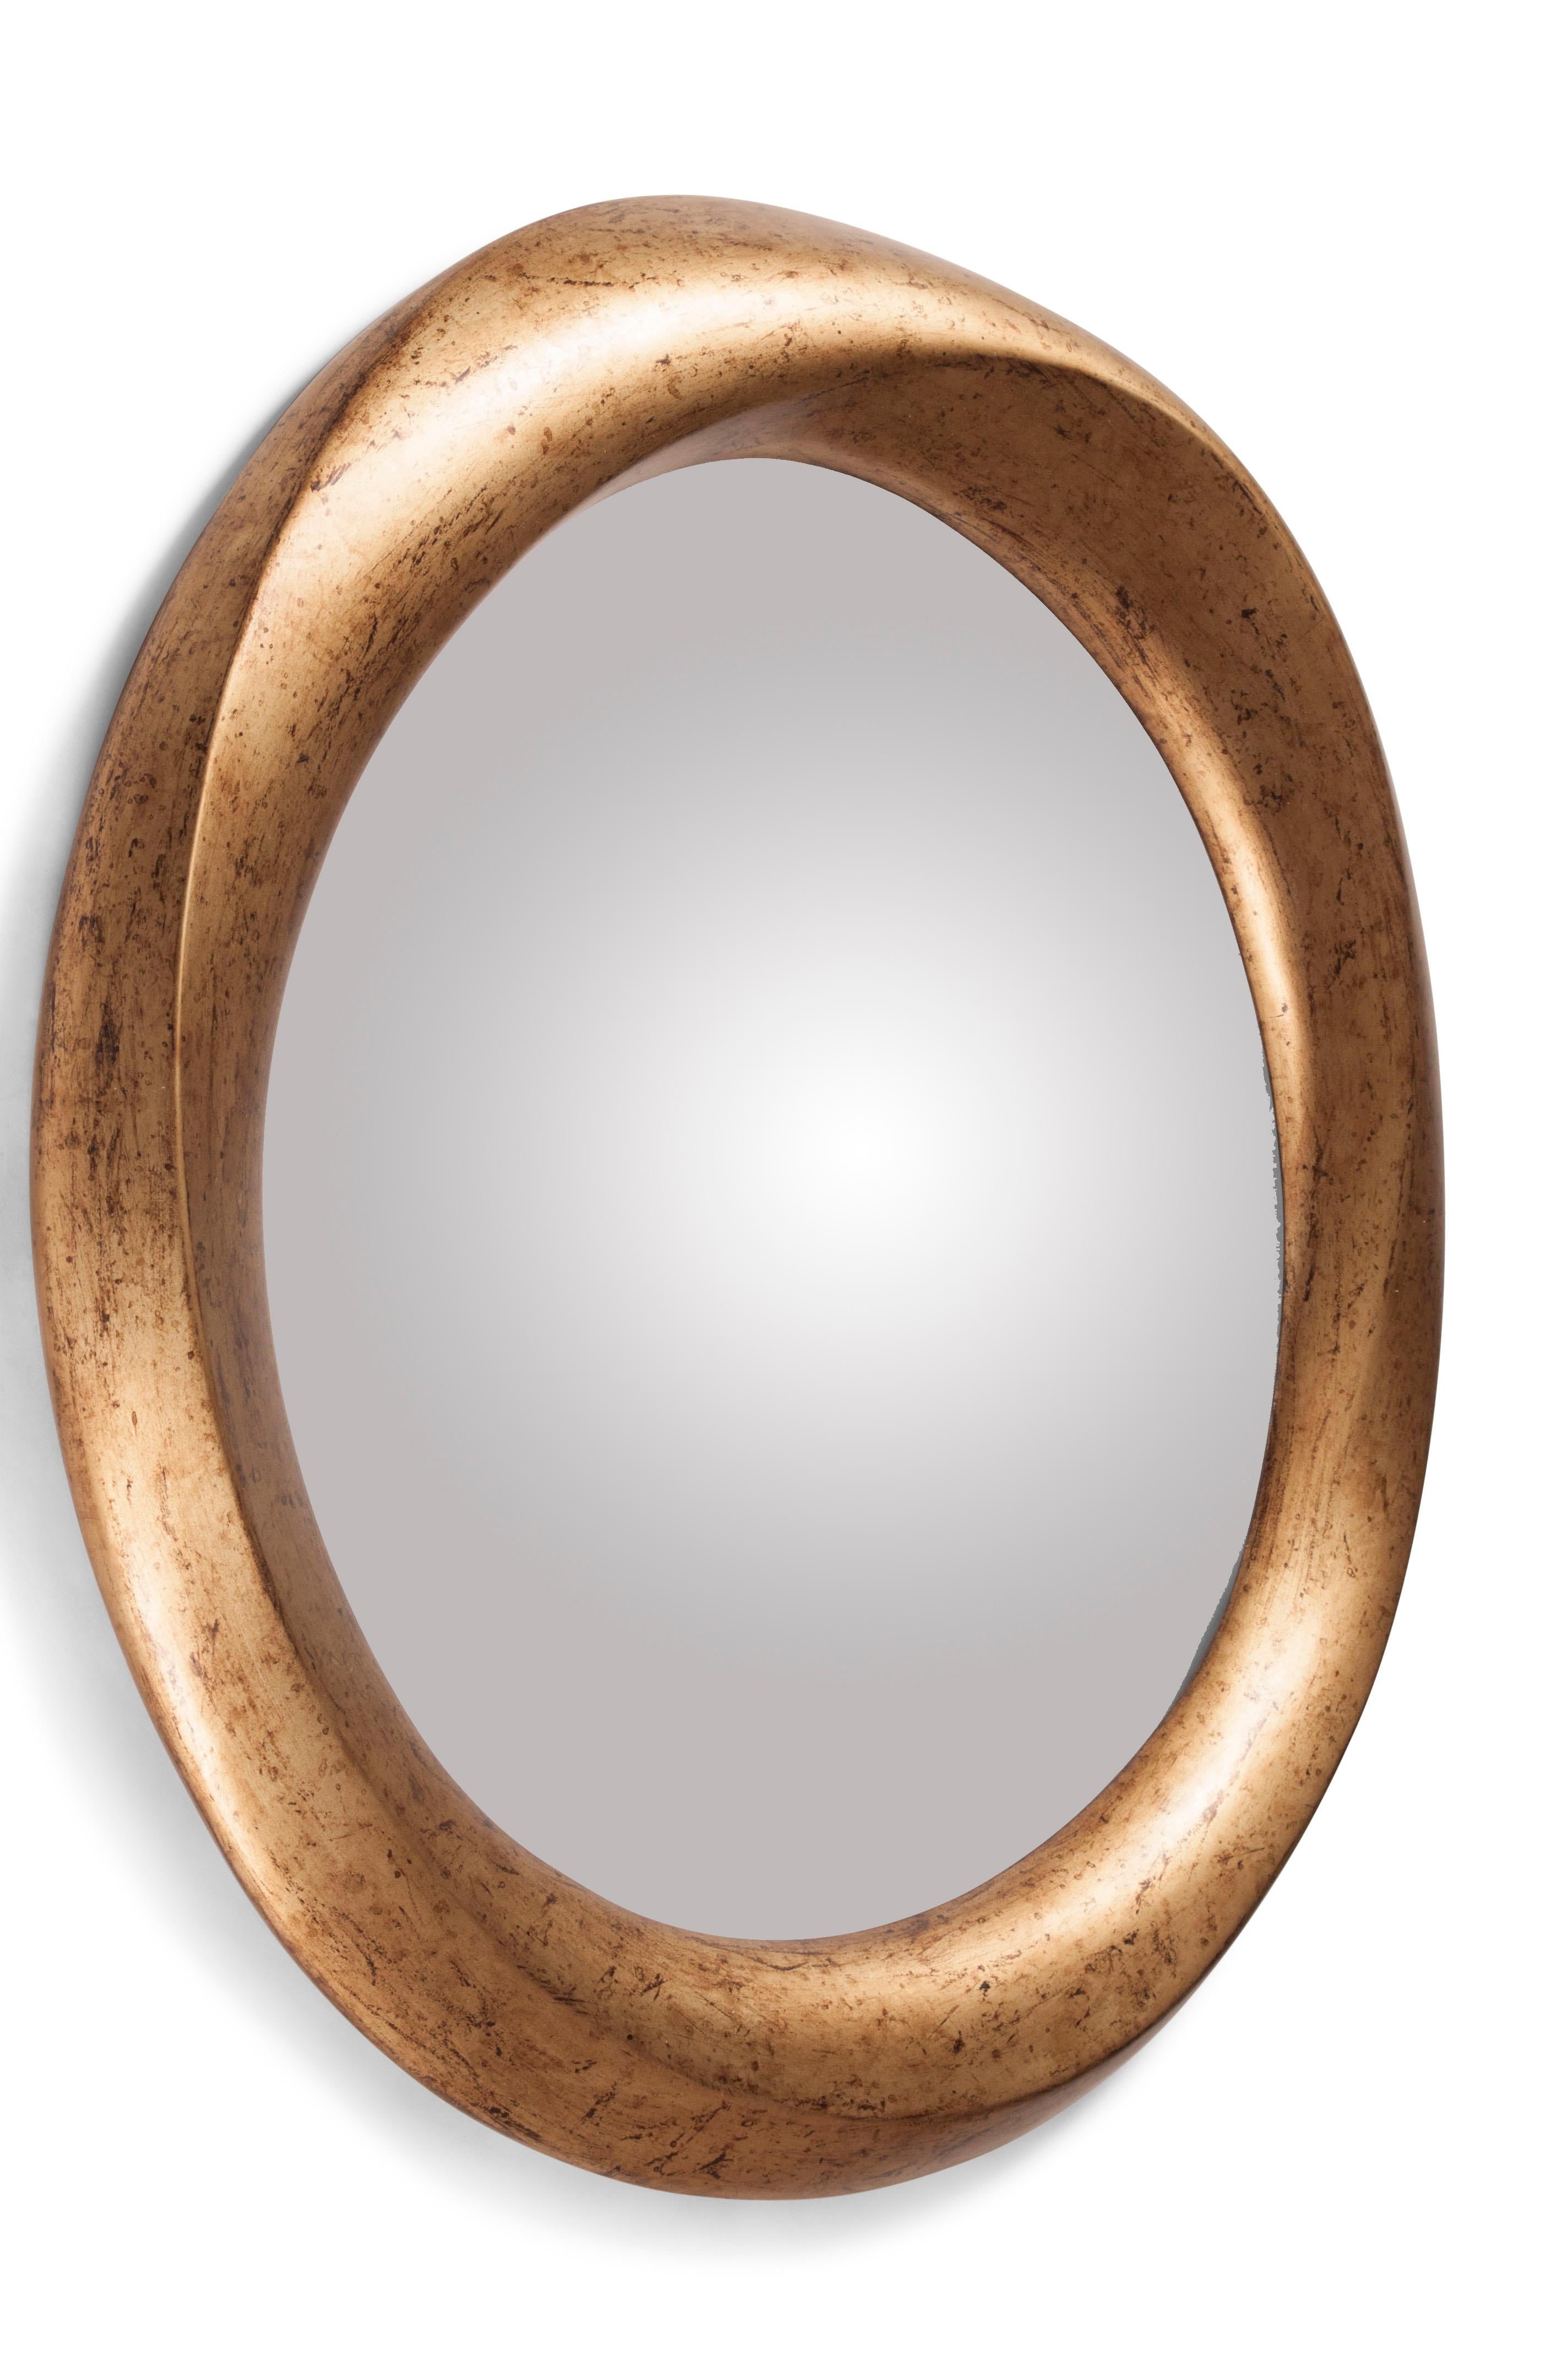 Modern Amorph Chiara Mirror Frame, Rusted Gold Finish  For Sale